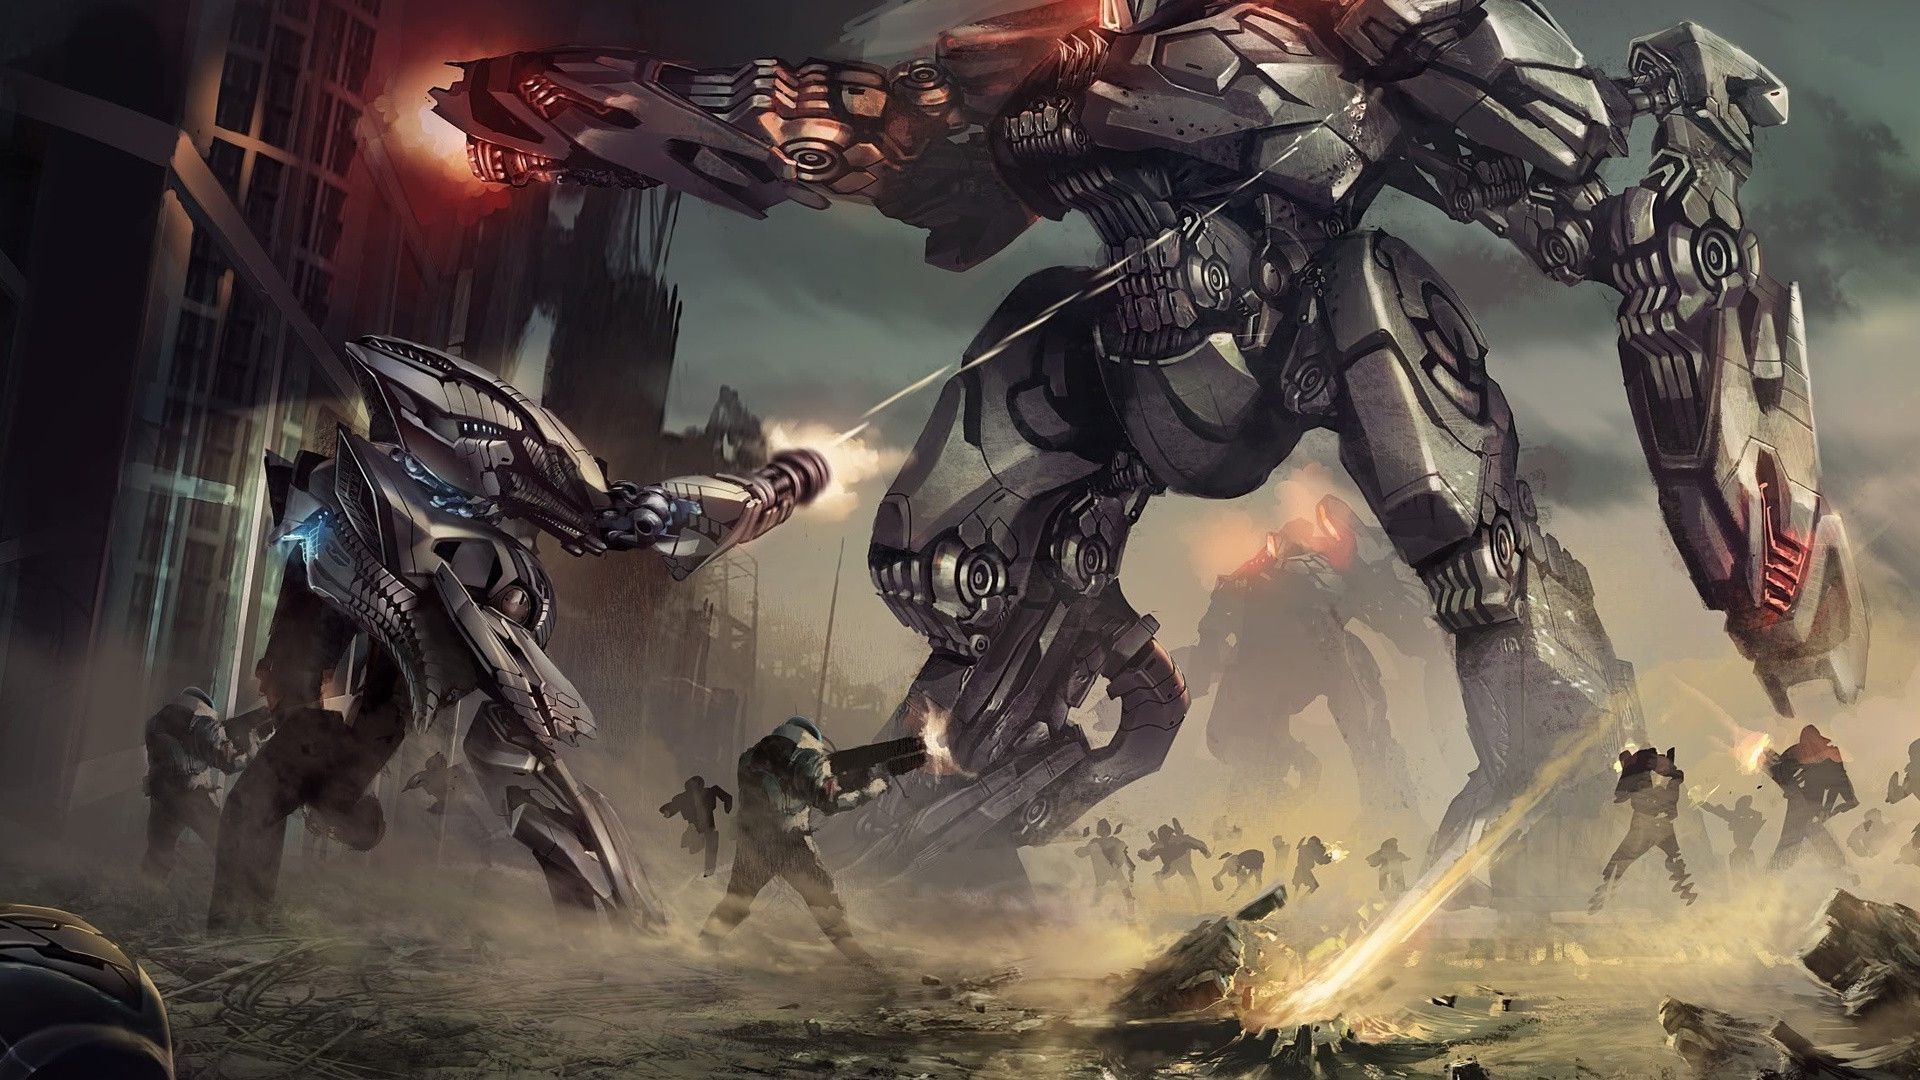 Armored Core has a new game coming, with From Software working on